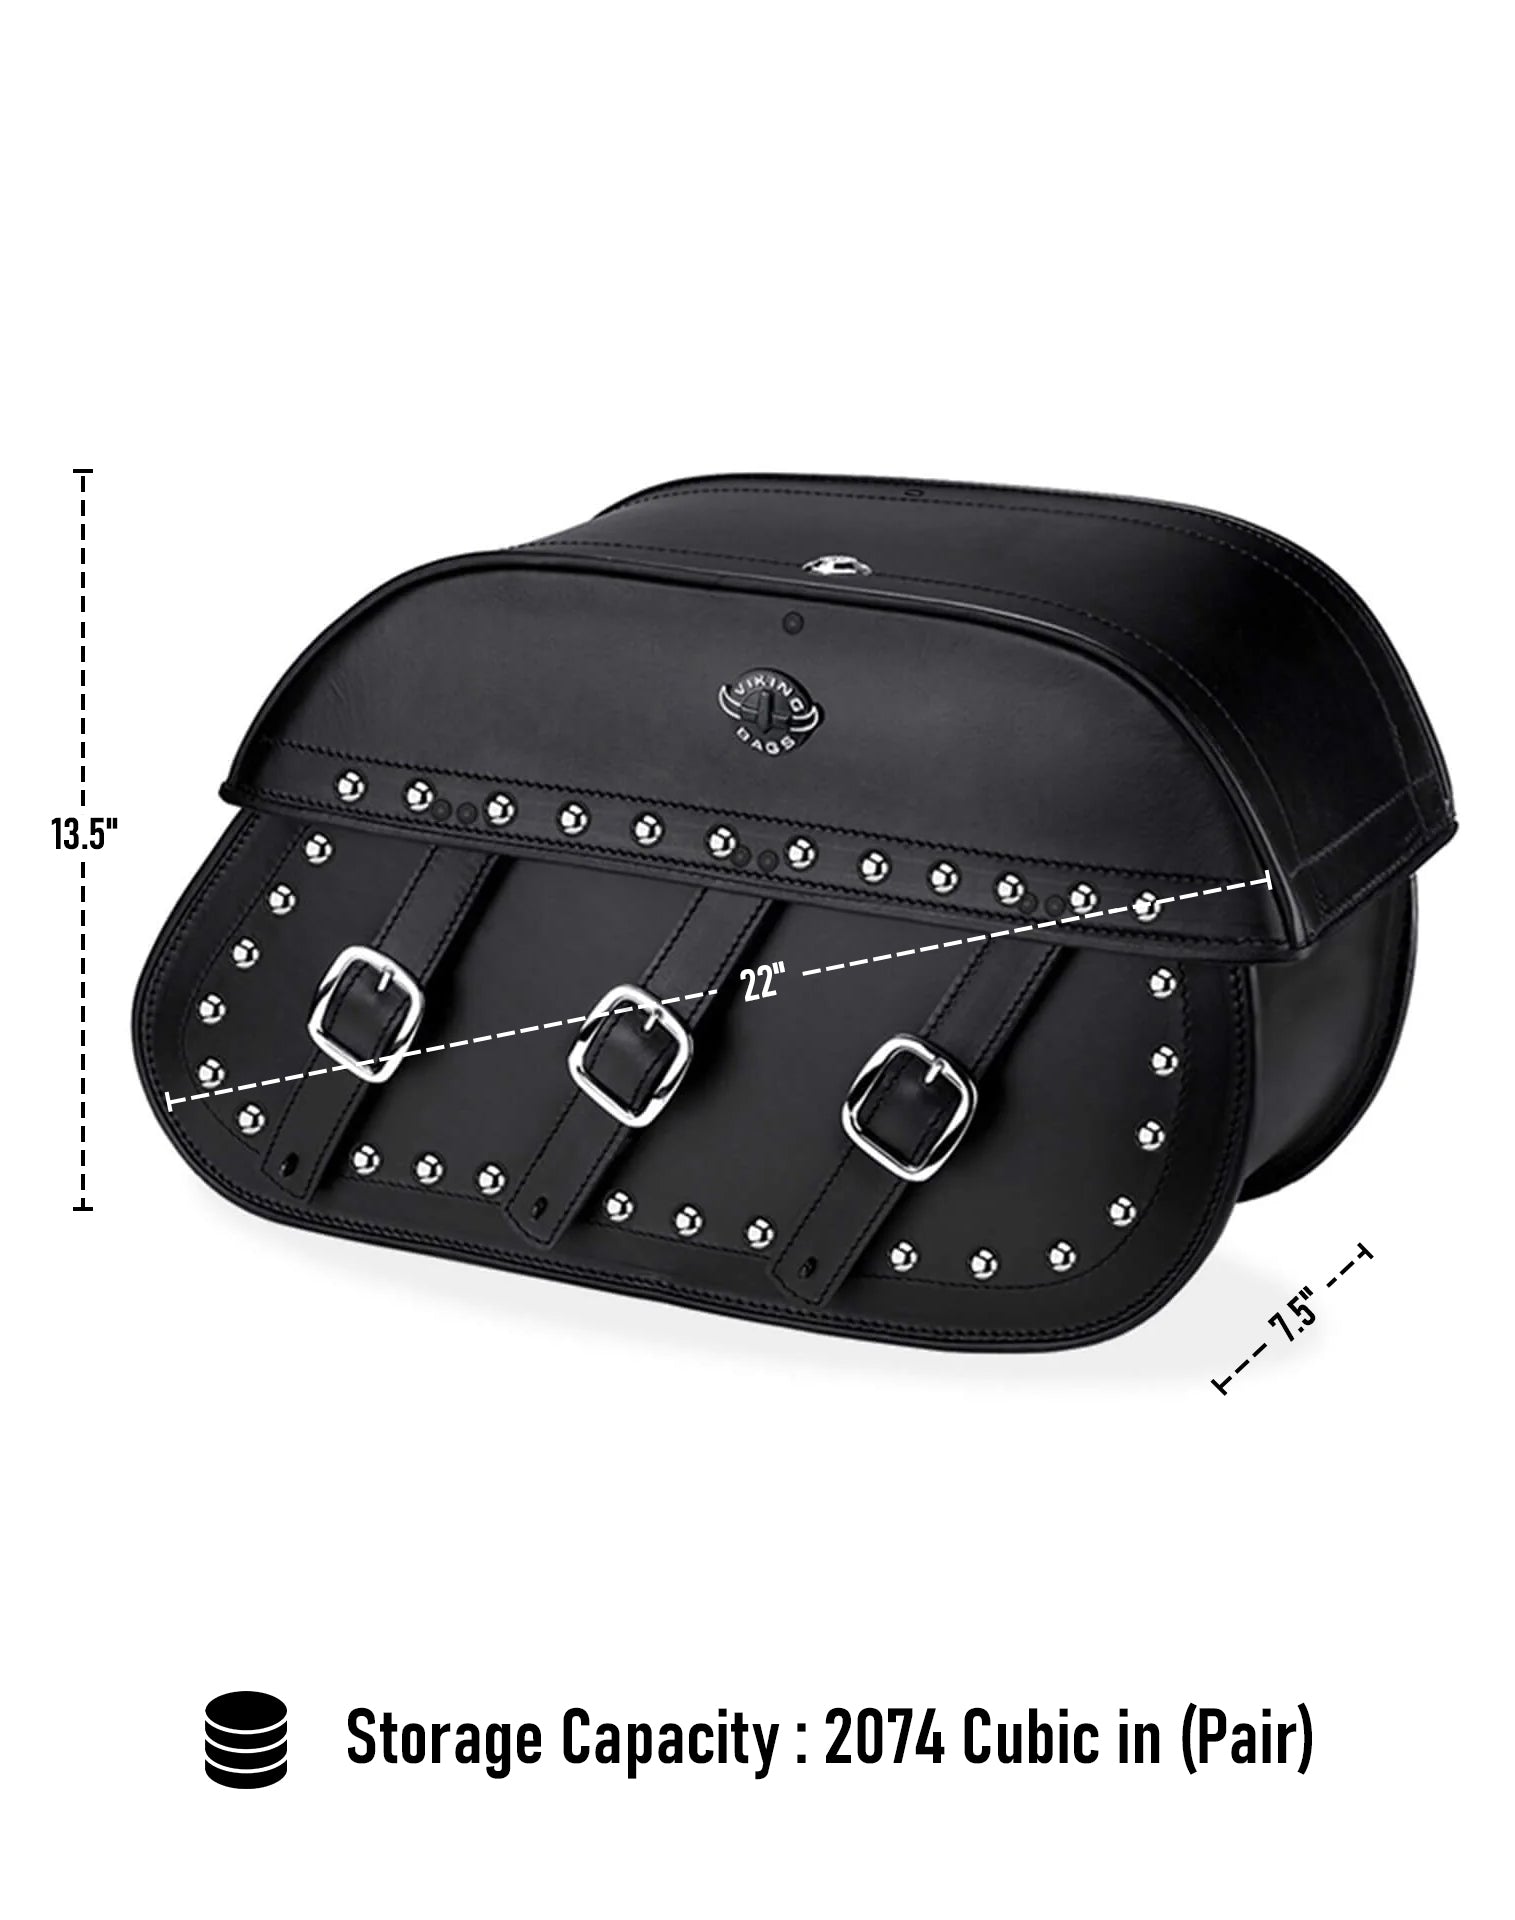 Viking Trianon Extra Large Victory High Ball Studded Leather Motorcycle Saddlebags Can Store Your Ridings Gears